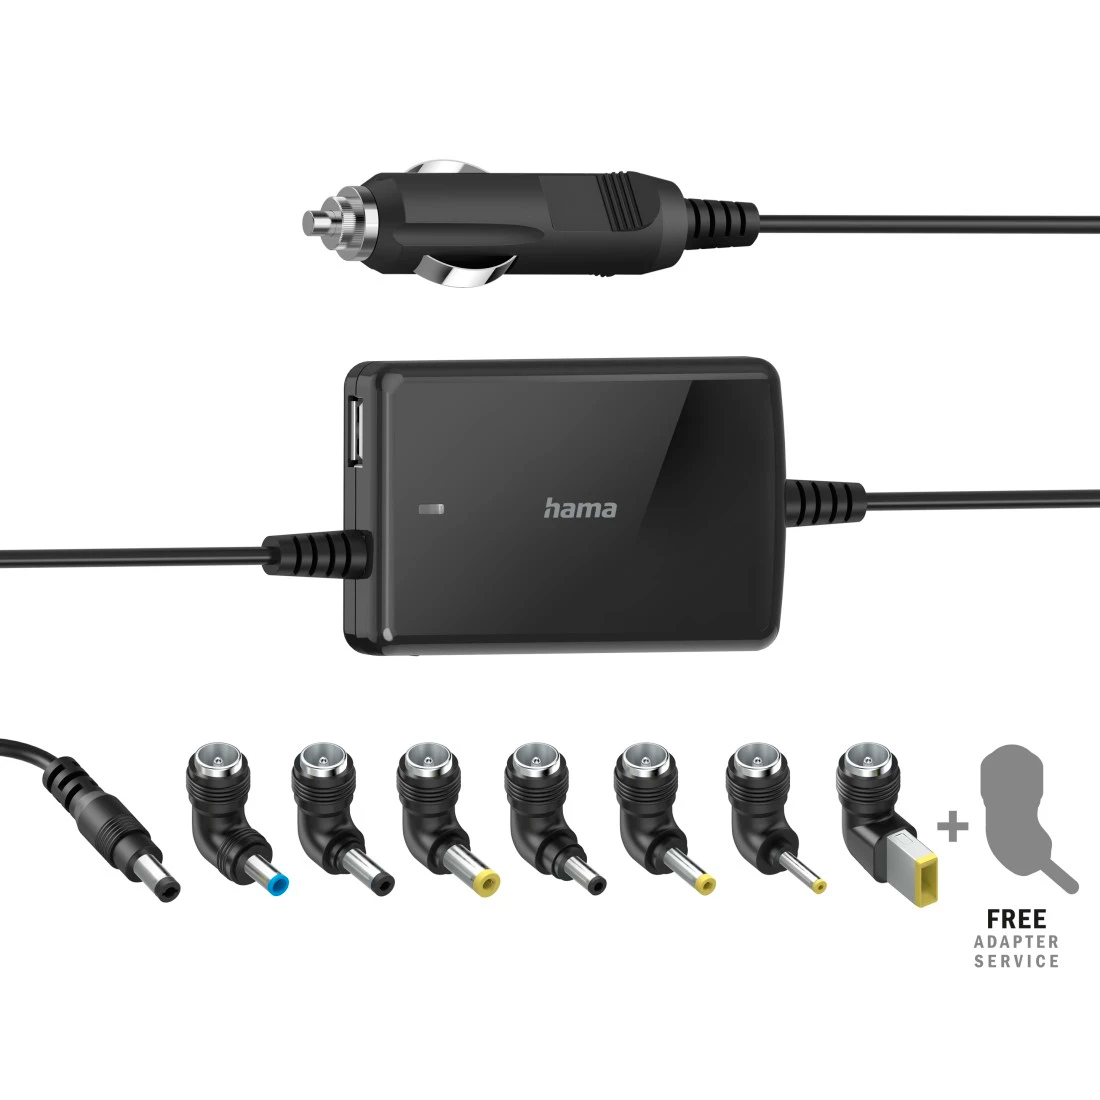 Hama Slim &amp; Light Universal Car Notebook Power Supply Adapter - Black | 426642 from Hama - DID Electrical